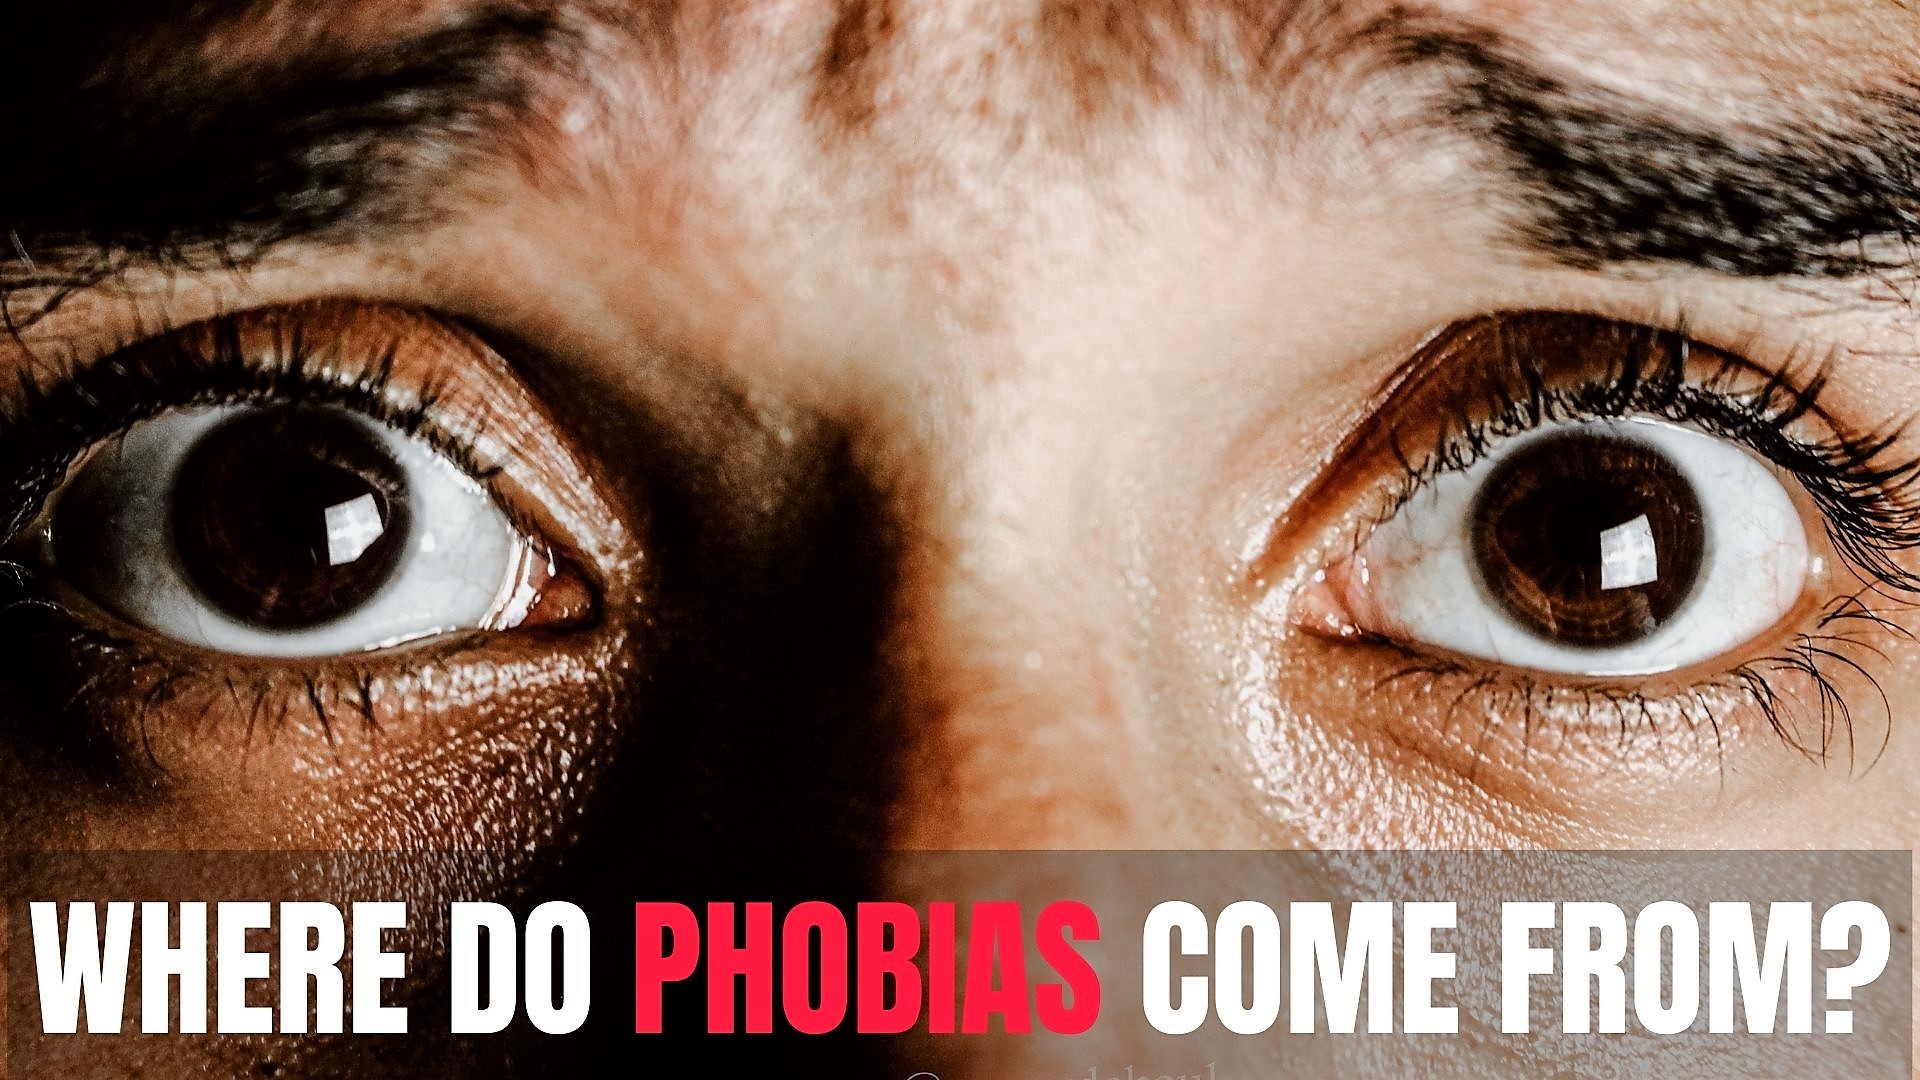 Where Do Phobias Come From? | The Little Albert Experiment